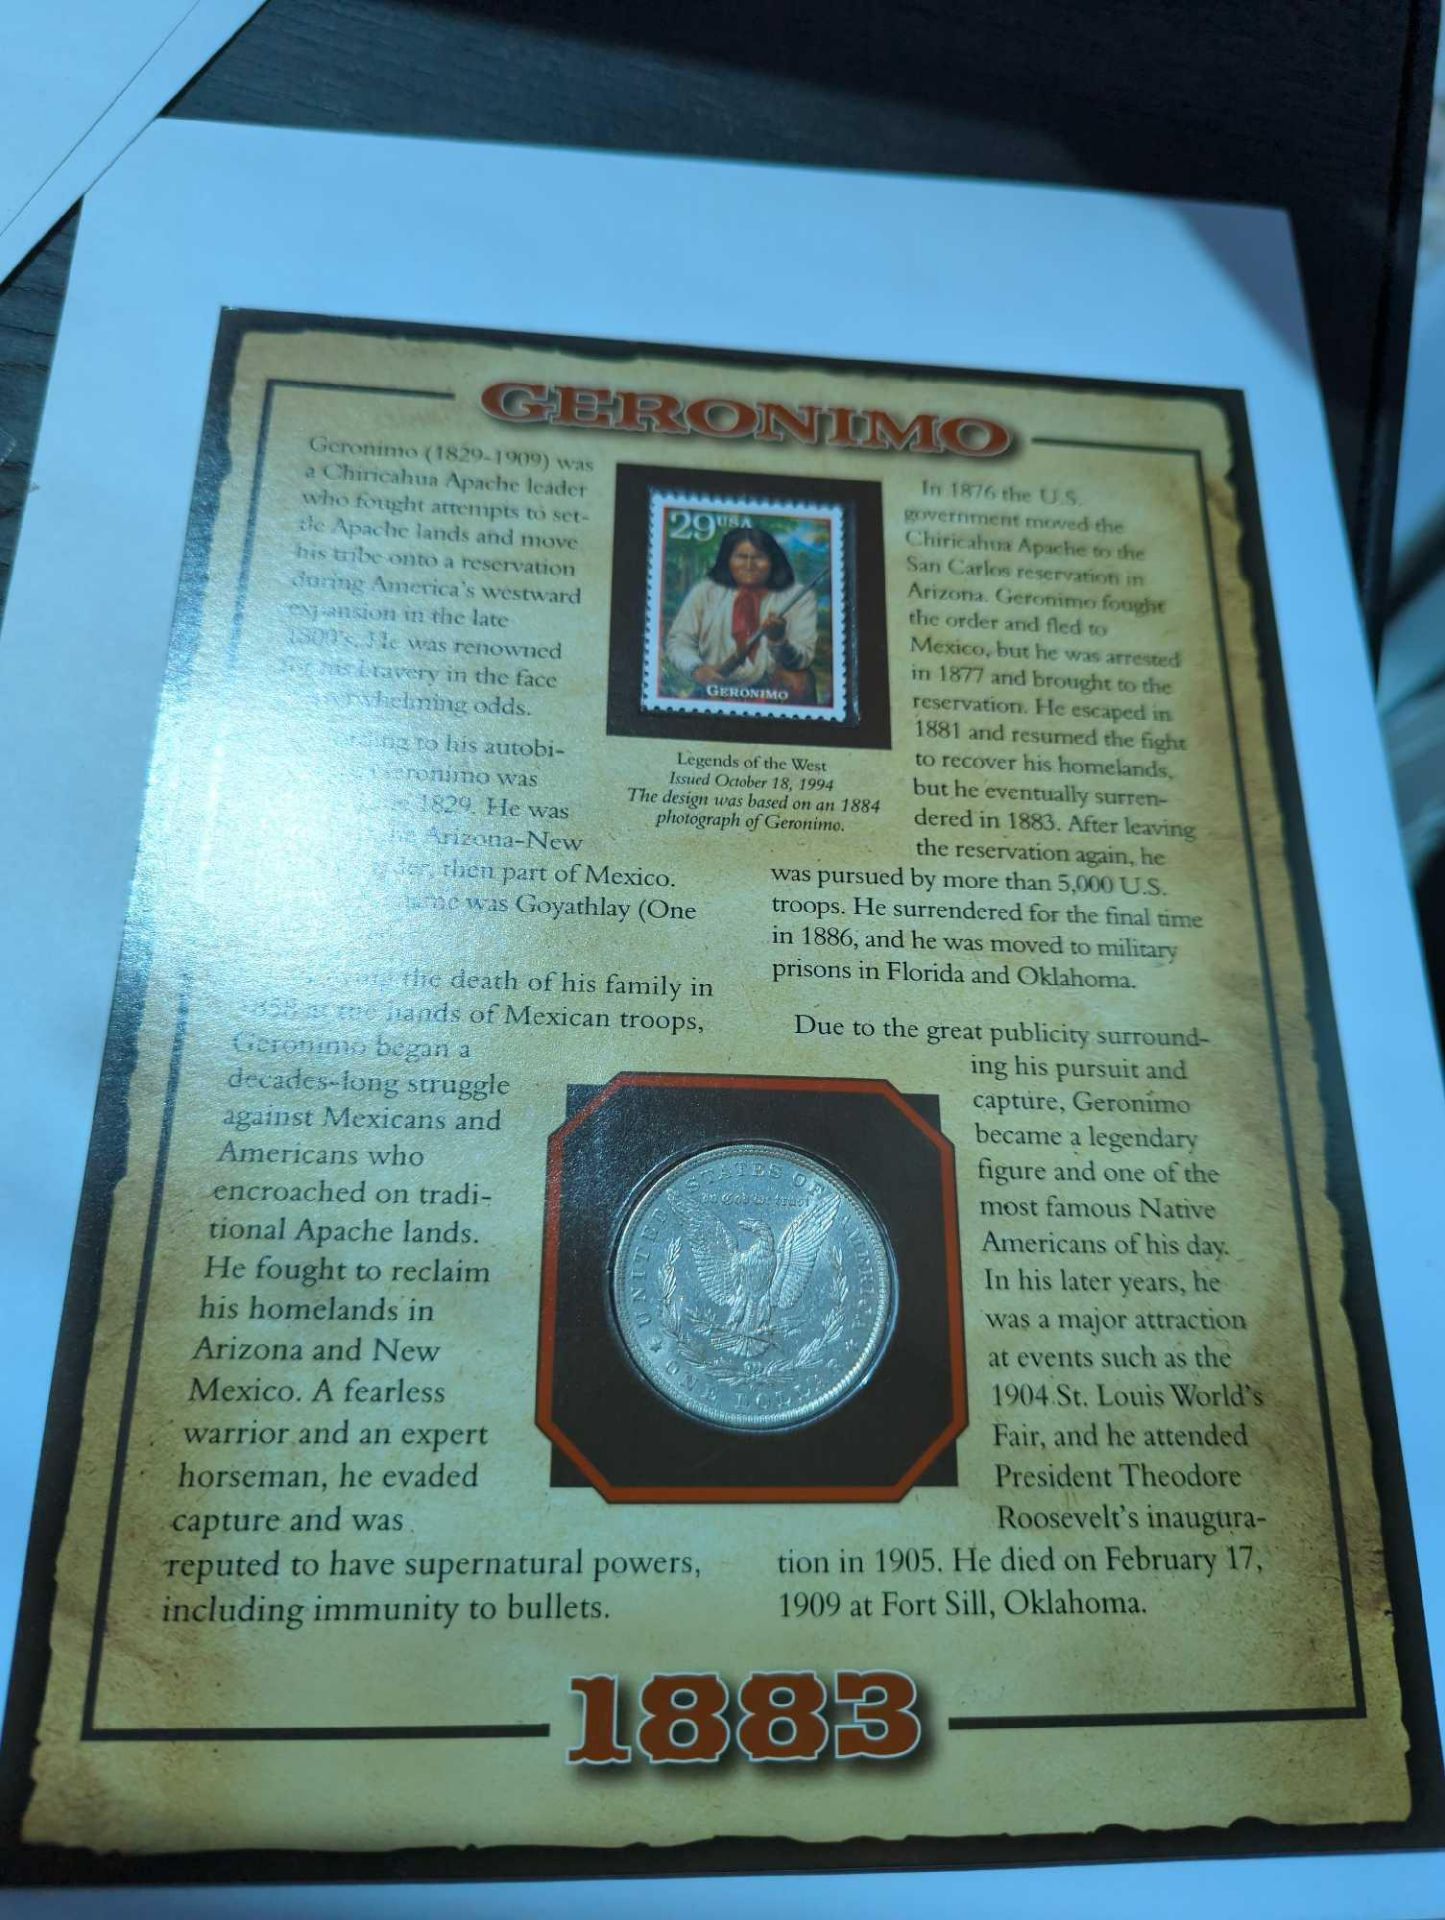 1883 Uncirculated Condition Morgan Dollar with Commemorative Geronimo stamp and facts - Image 6 of 7